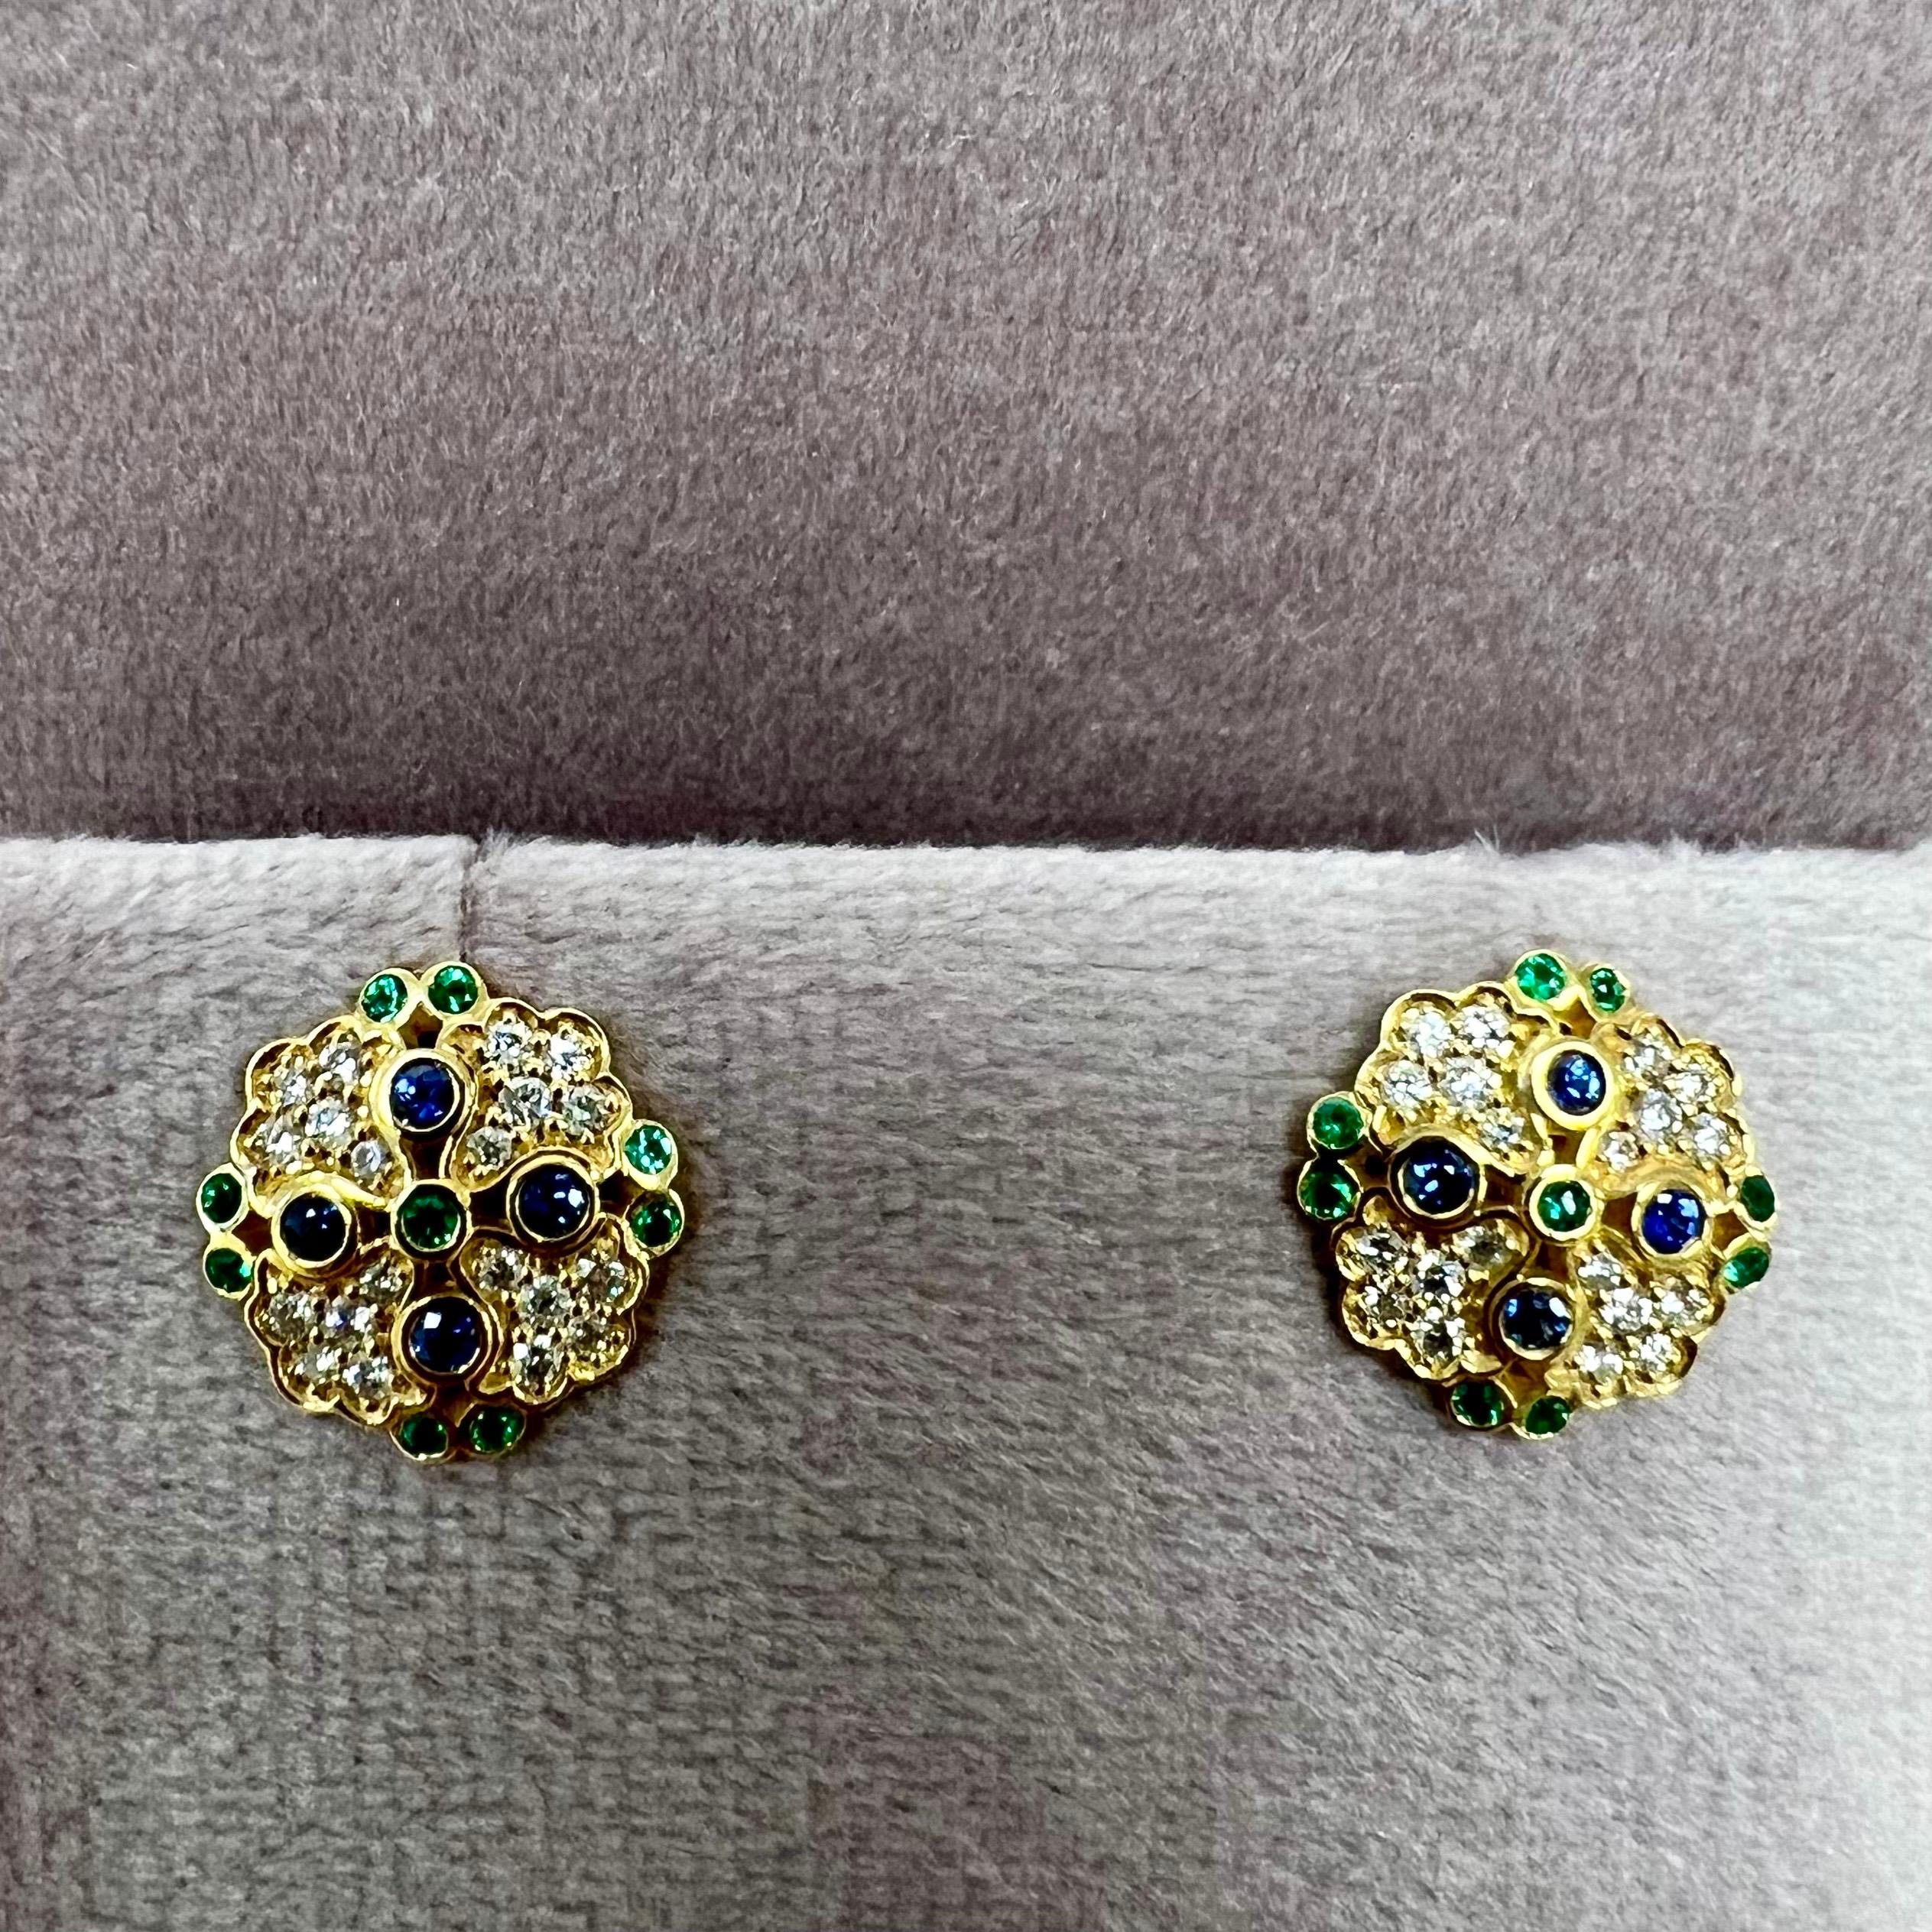 Created in 18 karat yellow gold
Emeralds 0.15 carat approx.
Blue sapphire 0.25 carat approx.
Diamonds 0.45 carat approx.
Post backs for pierced ears
Limited edition

Exquisitely crafted in 18 karat yellow gold, these limited edition earrings boast